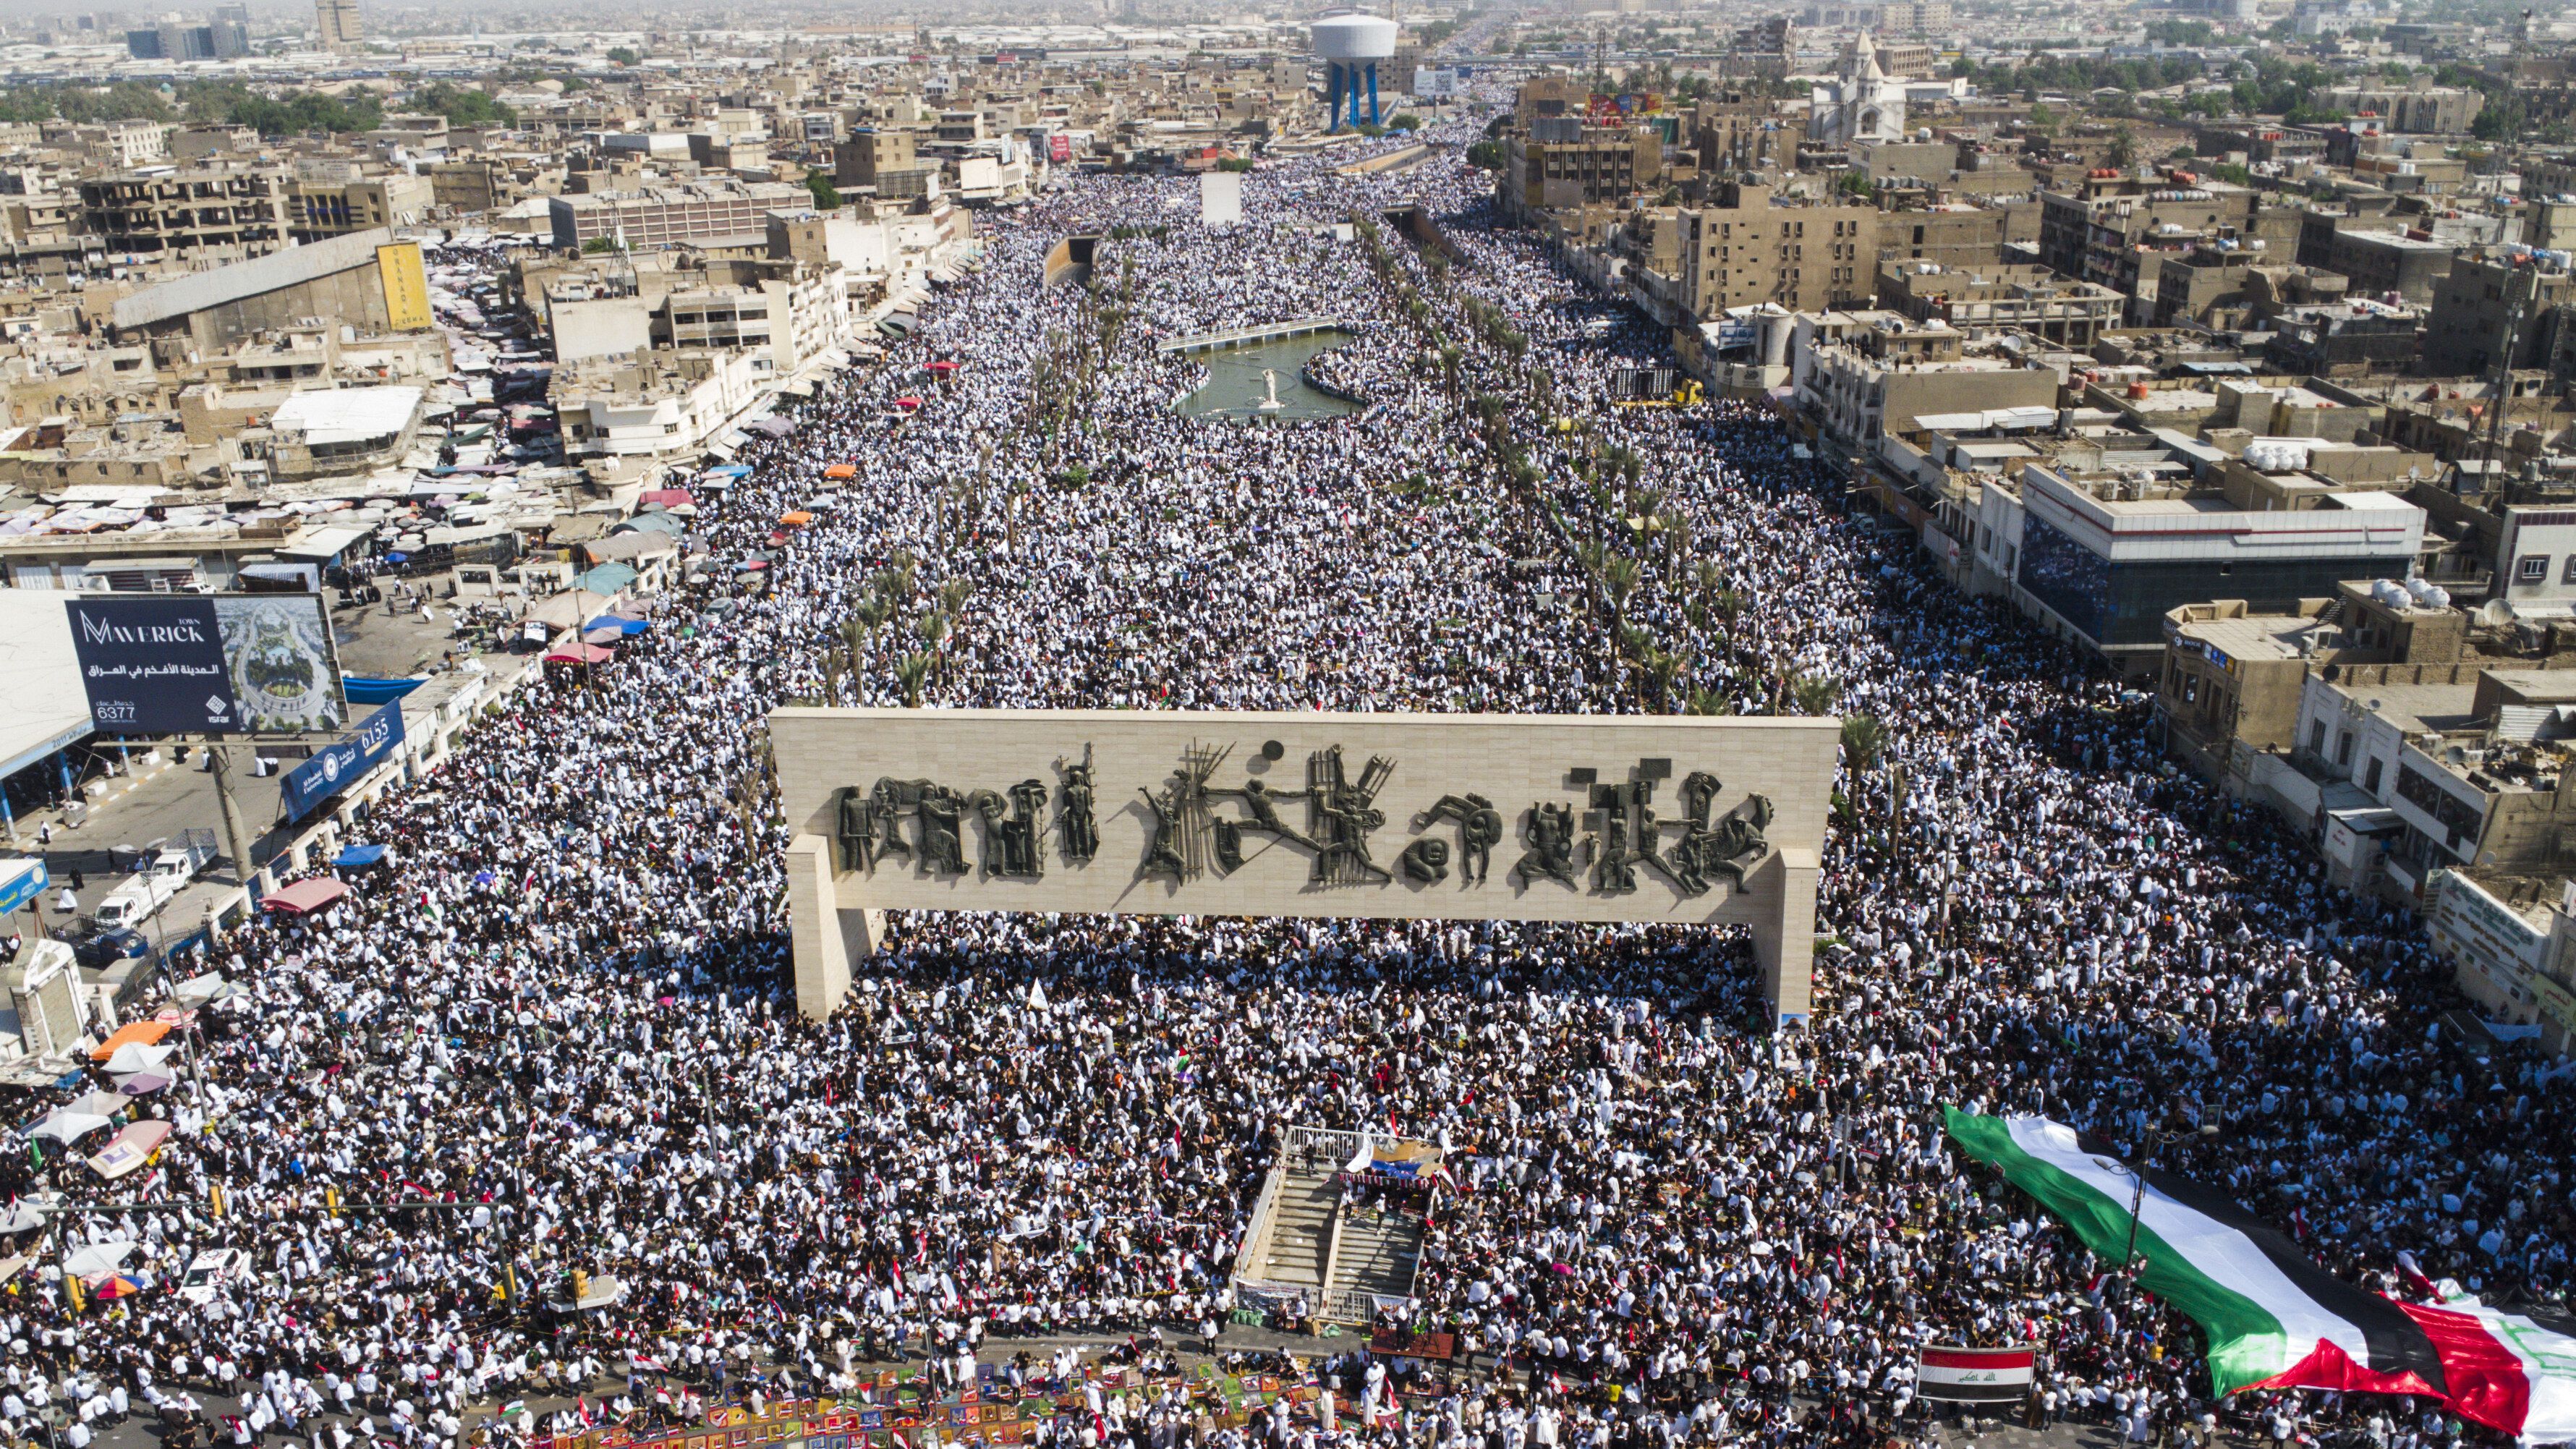 Iraqis hold a mass rally supporting the Palestinians in the Gaza Strip on Friday, Oct. 13, 2023., in Baghdad, Iraq. (AP Photo/Anmar Khalil)

Associated Press/LaPresse
Only Italy and Spain